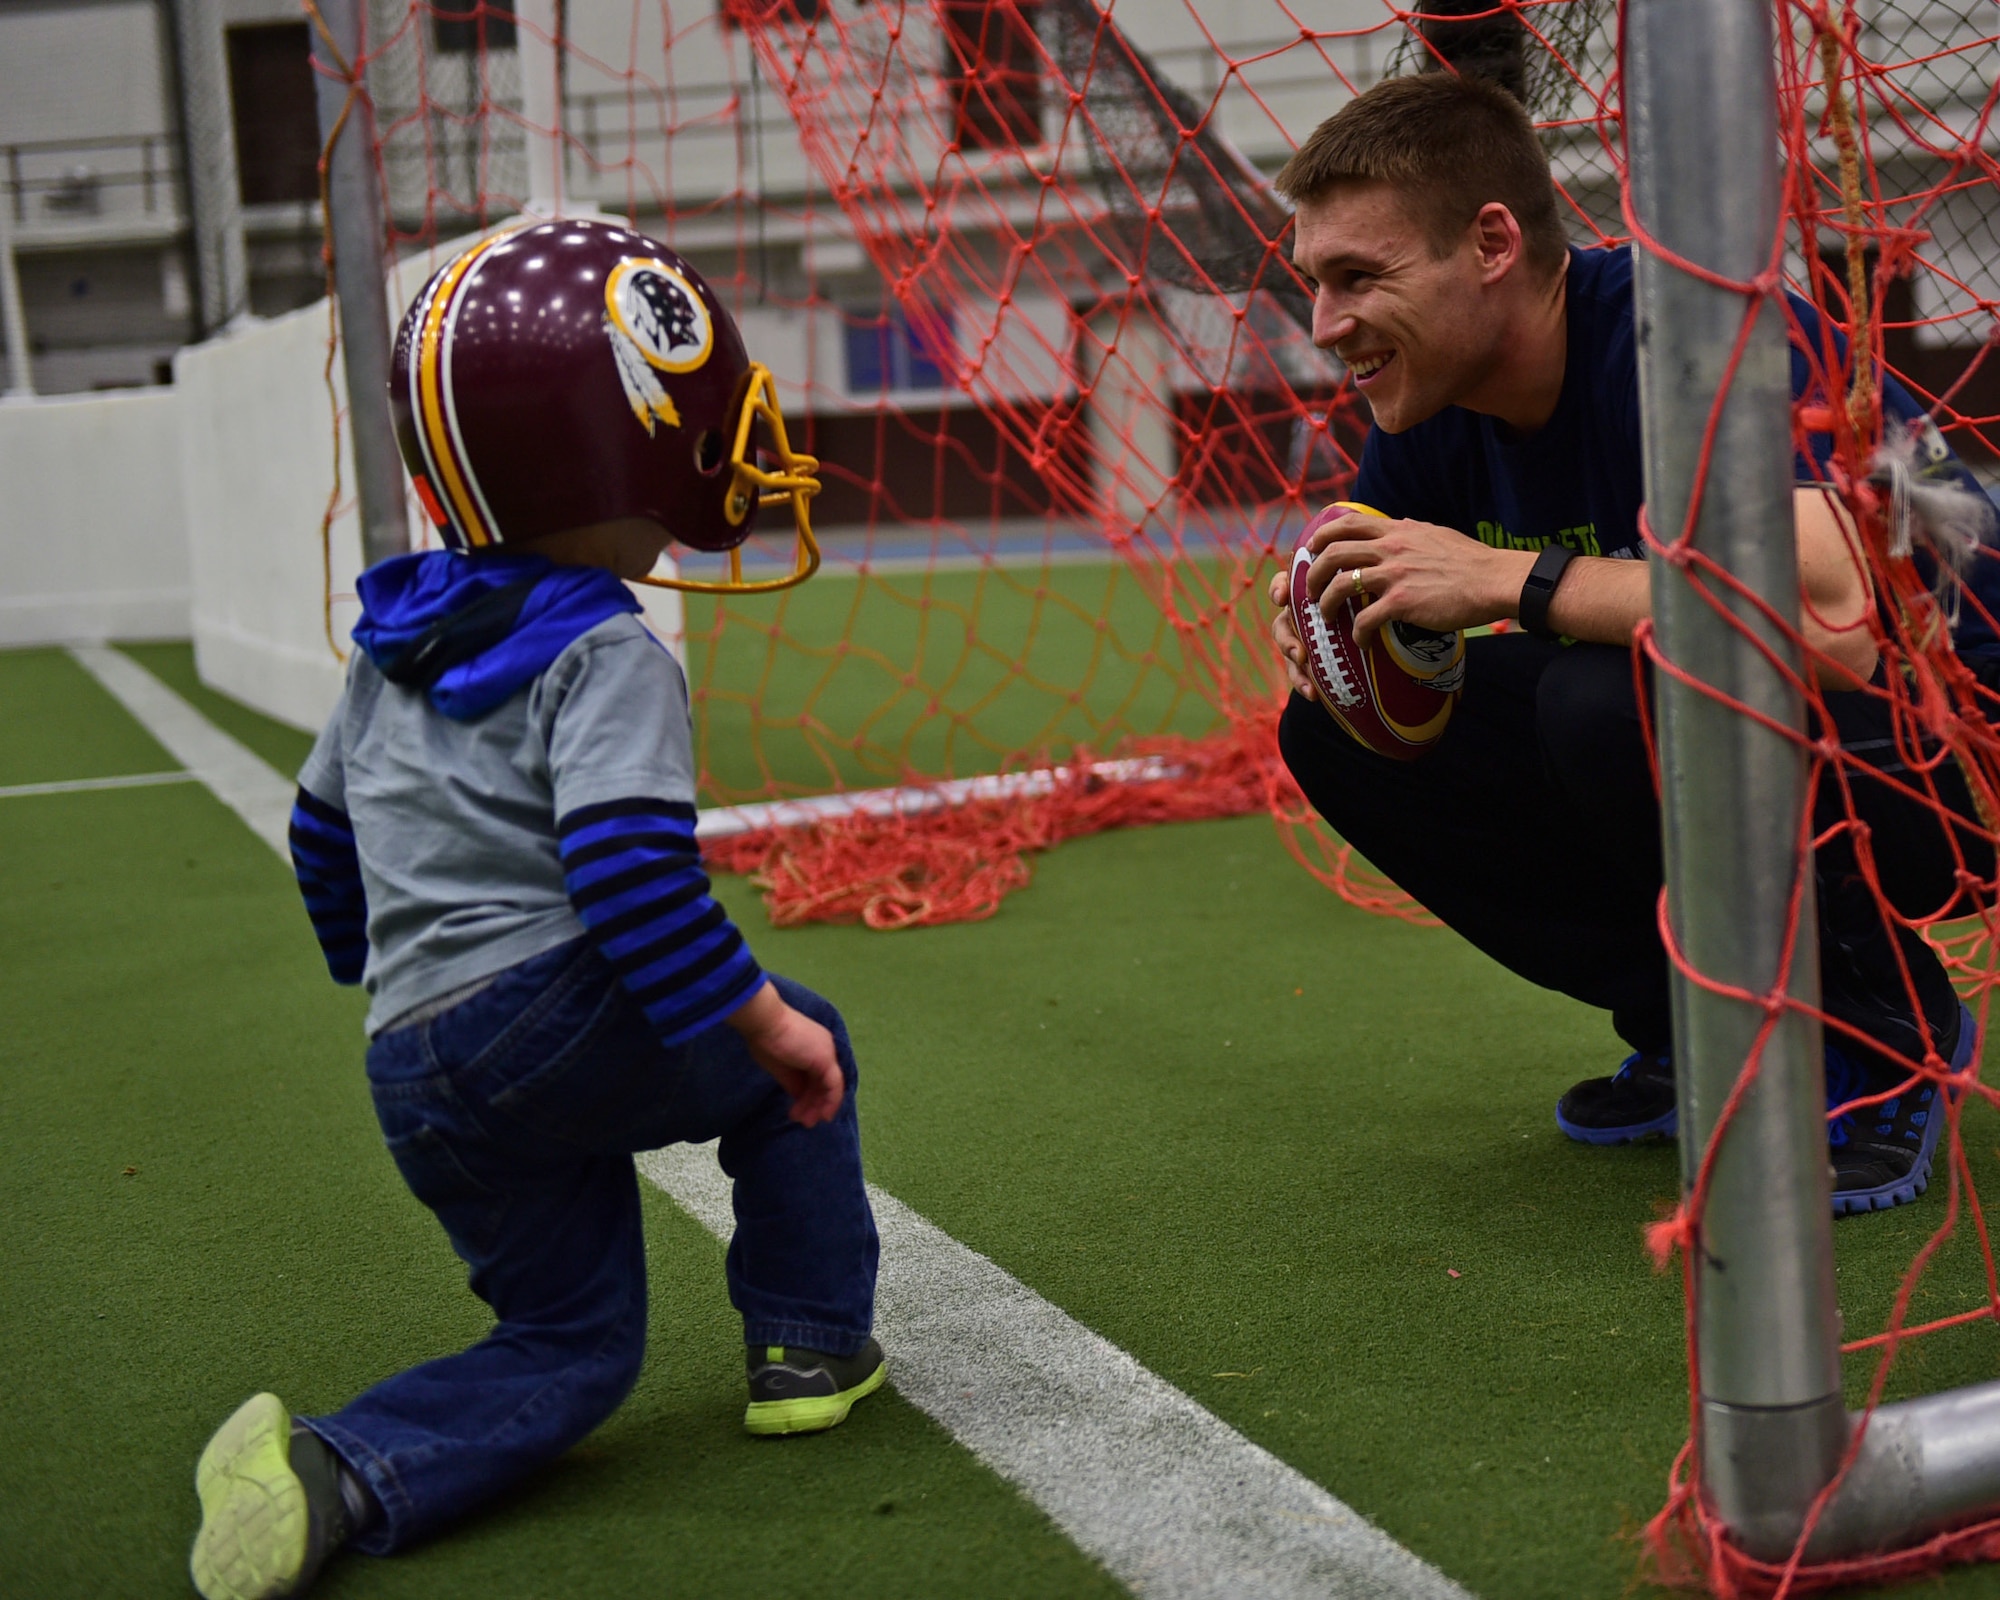 Air Force Staff Sgt. Chris Meyer, 28th Contracting Squadron contract administrator, celebrates a touchdown with his son, Nate, while playing football in the Pride Hangar at Ellsworth Air Force Base, S.D., Nov. 4, 2015. Meyer and his family use the facility during winter to escape inclement weather. U.S. Air Force photo by Airman 1st Class James L. Miller